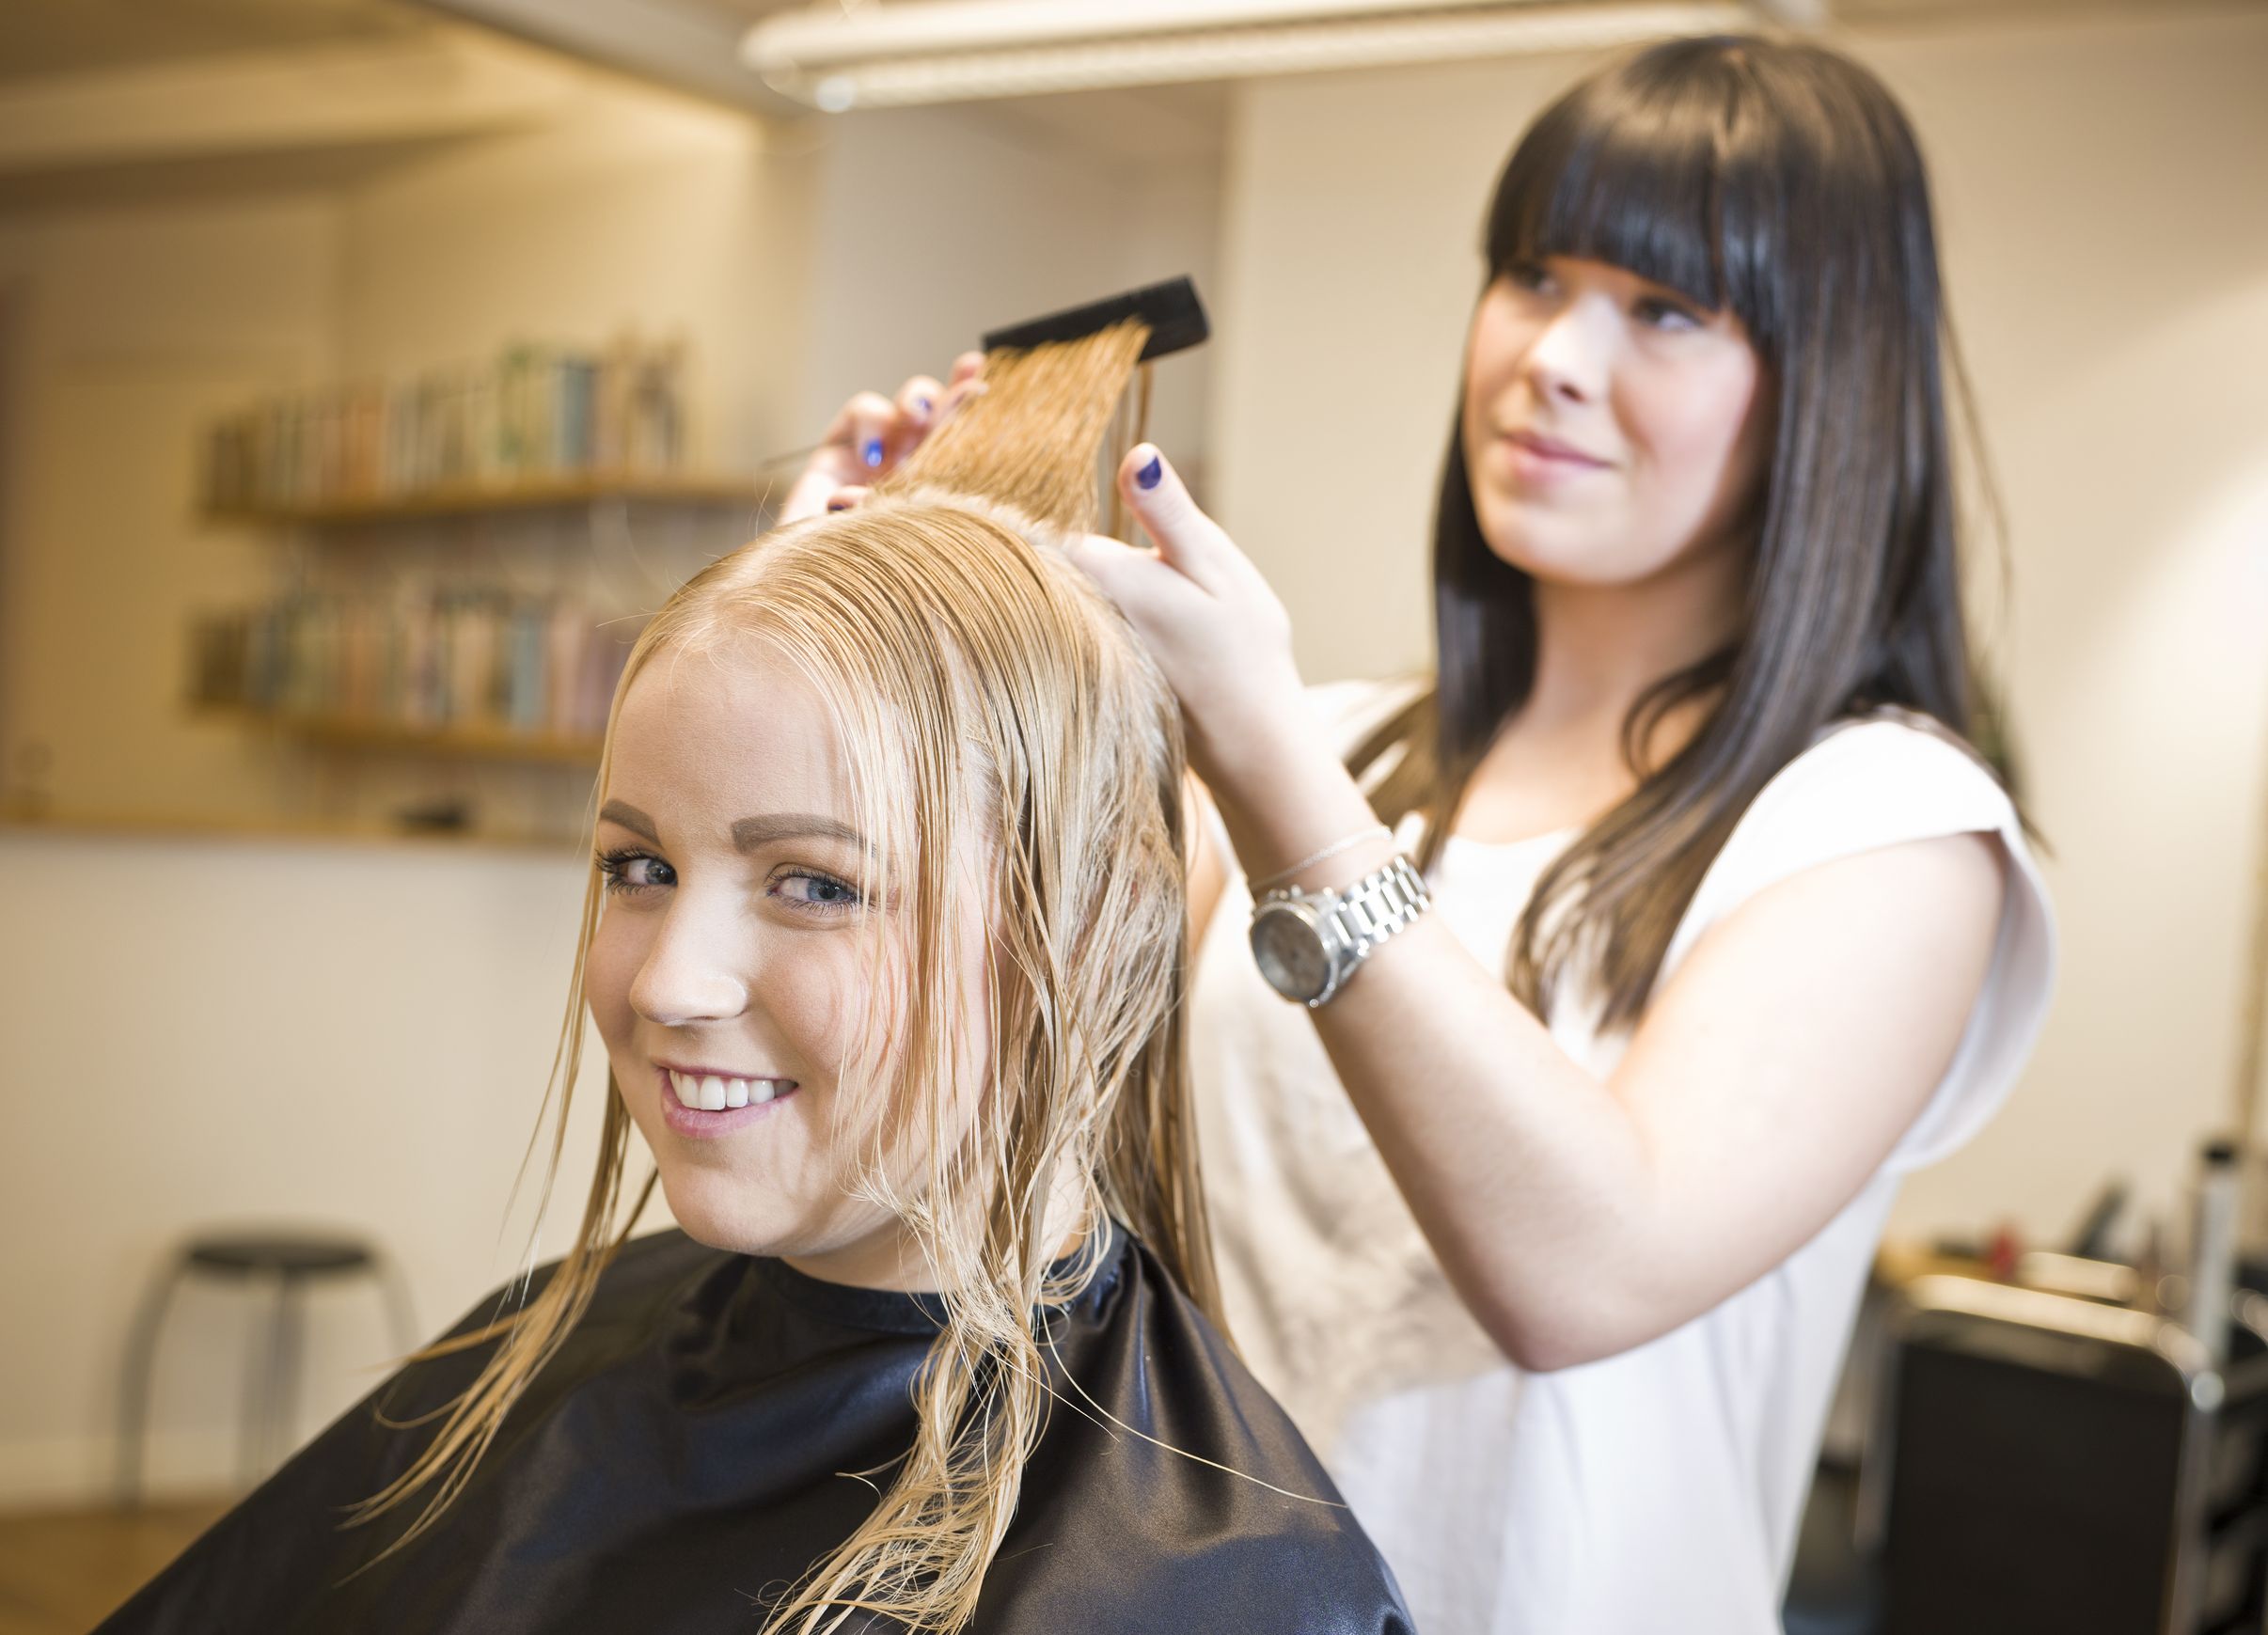 Benefits of Choosing a Hair Extensions Salon in Arizona